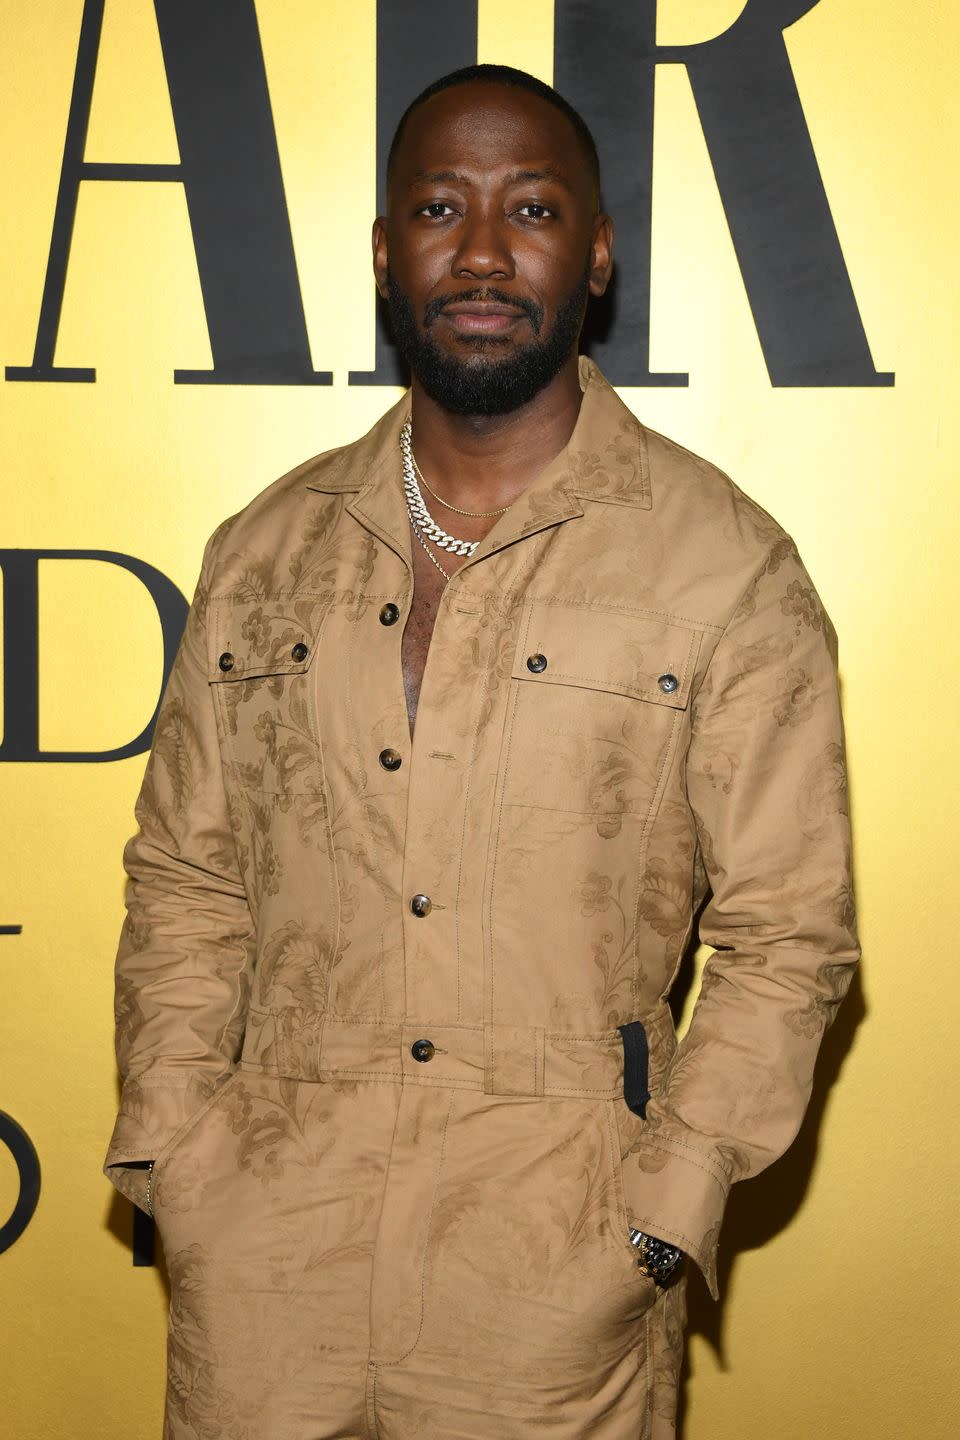 lamorne morris, a man stands with hands in his pockets wearing a brown jumpsuit